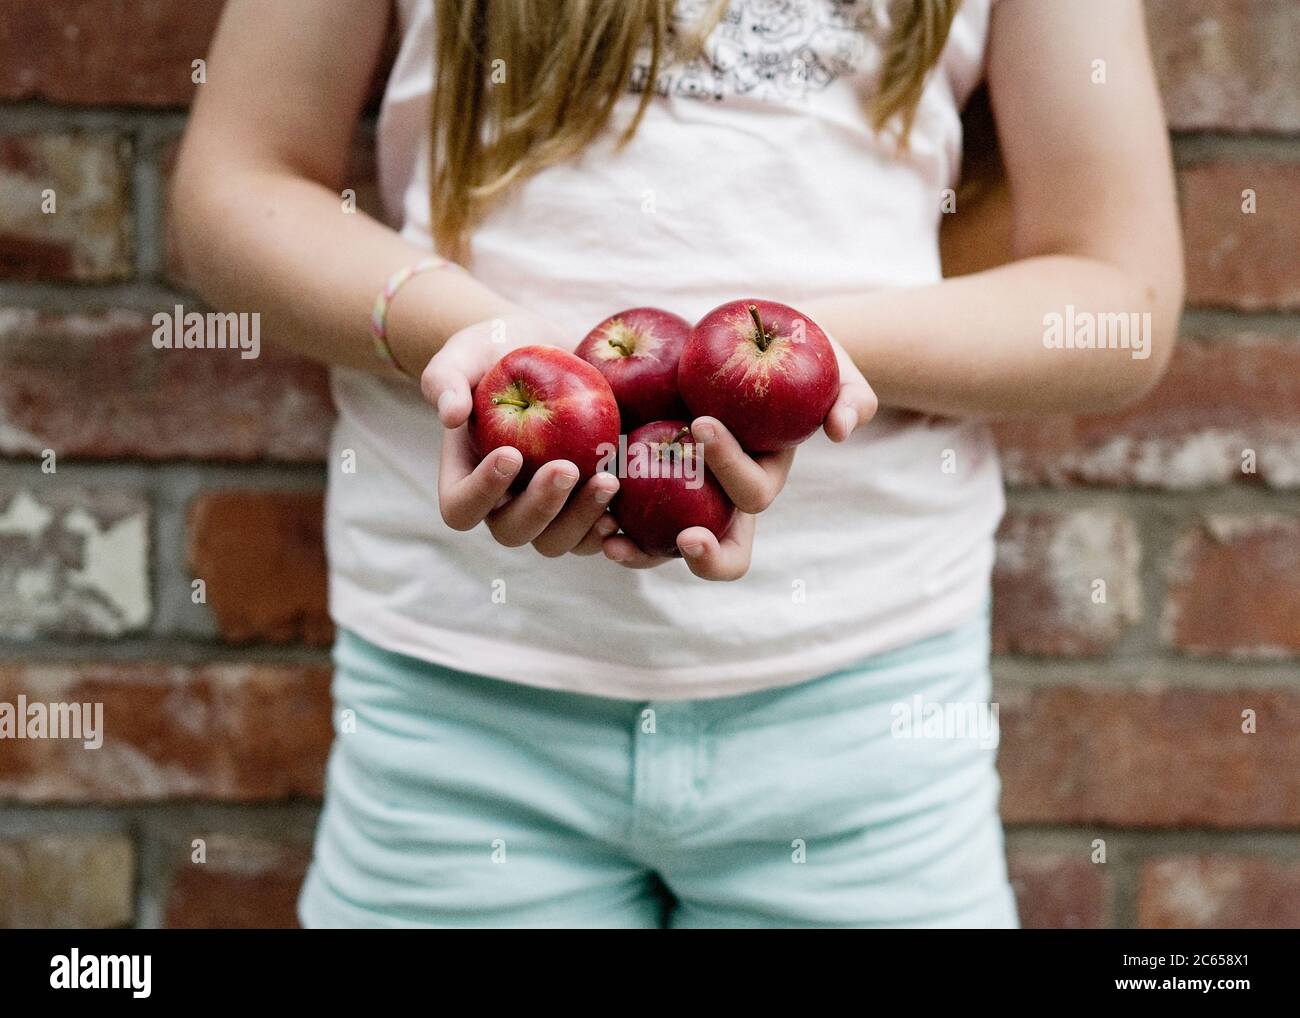 A child holds four red apples in the palms of their hands outdoors in natural light in front of a brick wall. Stock Photo